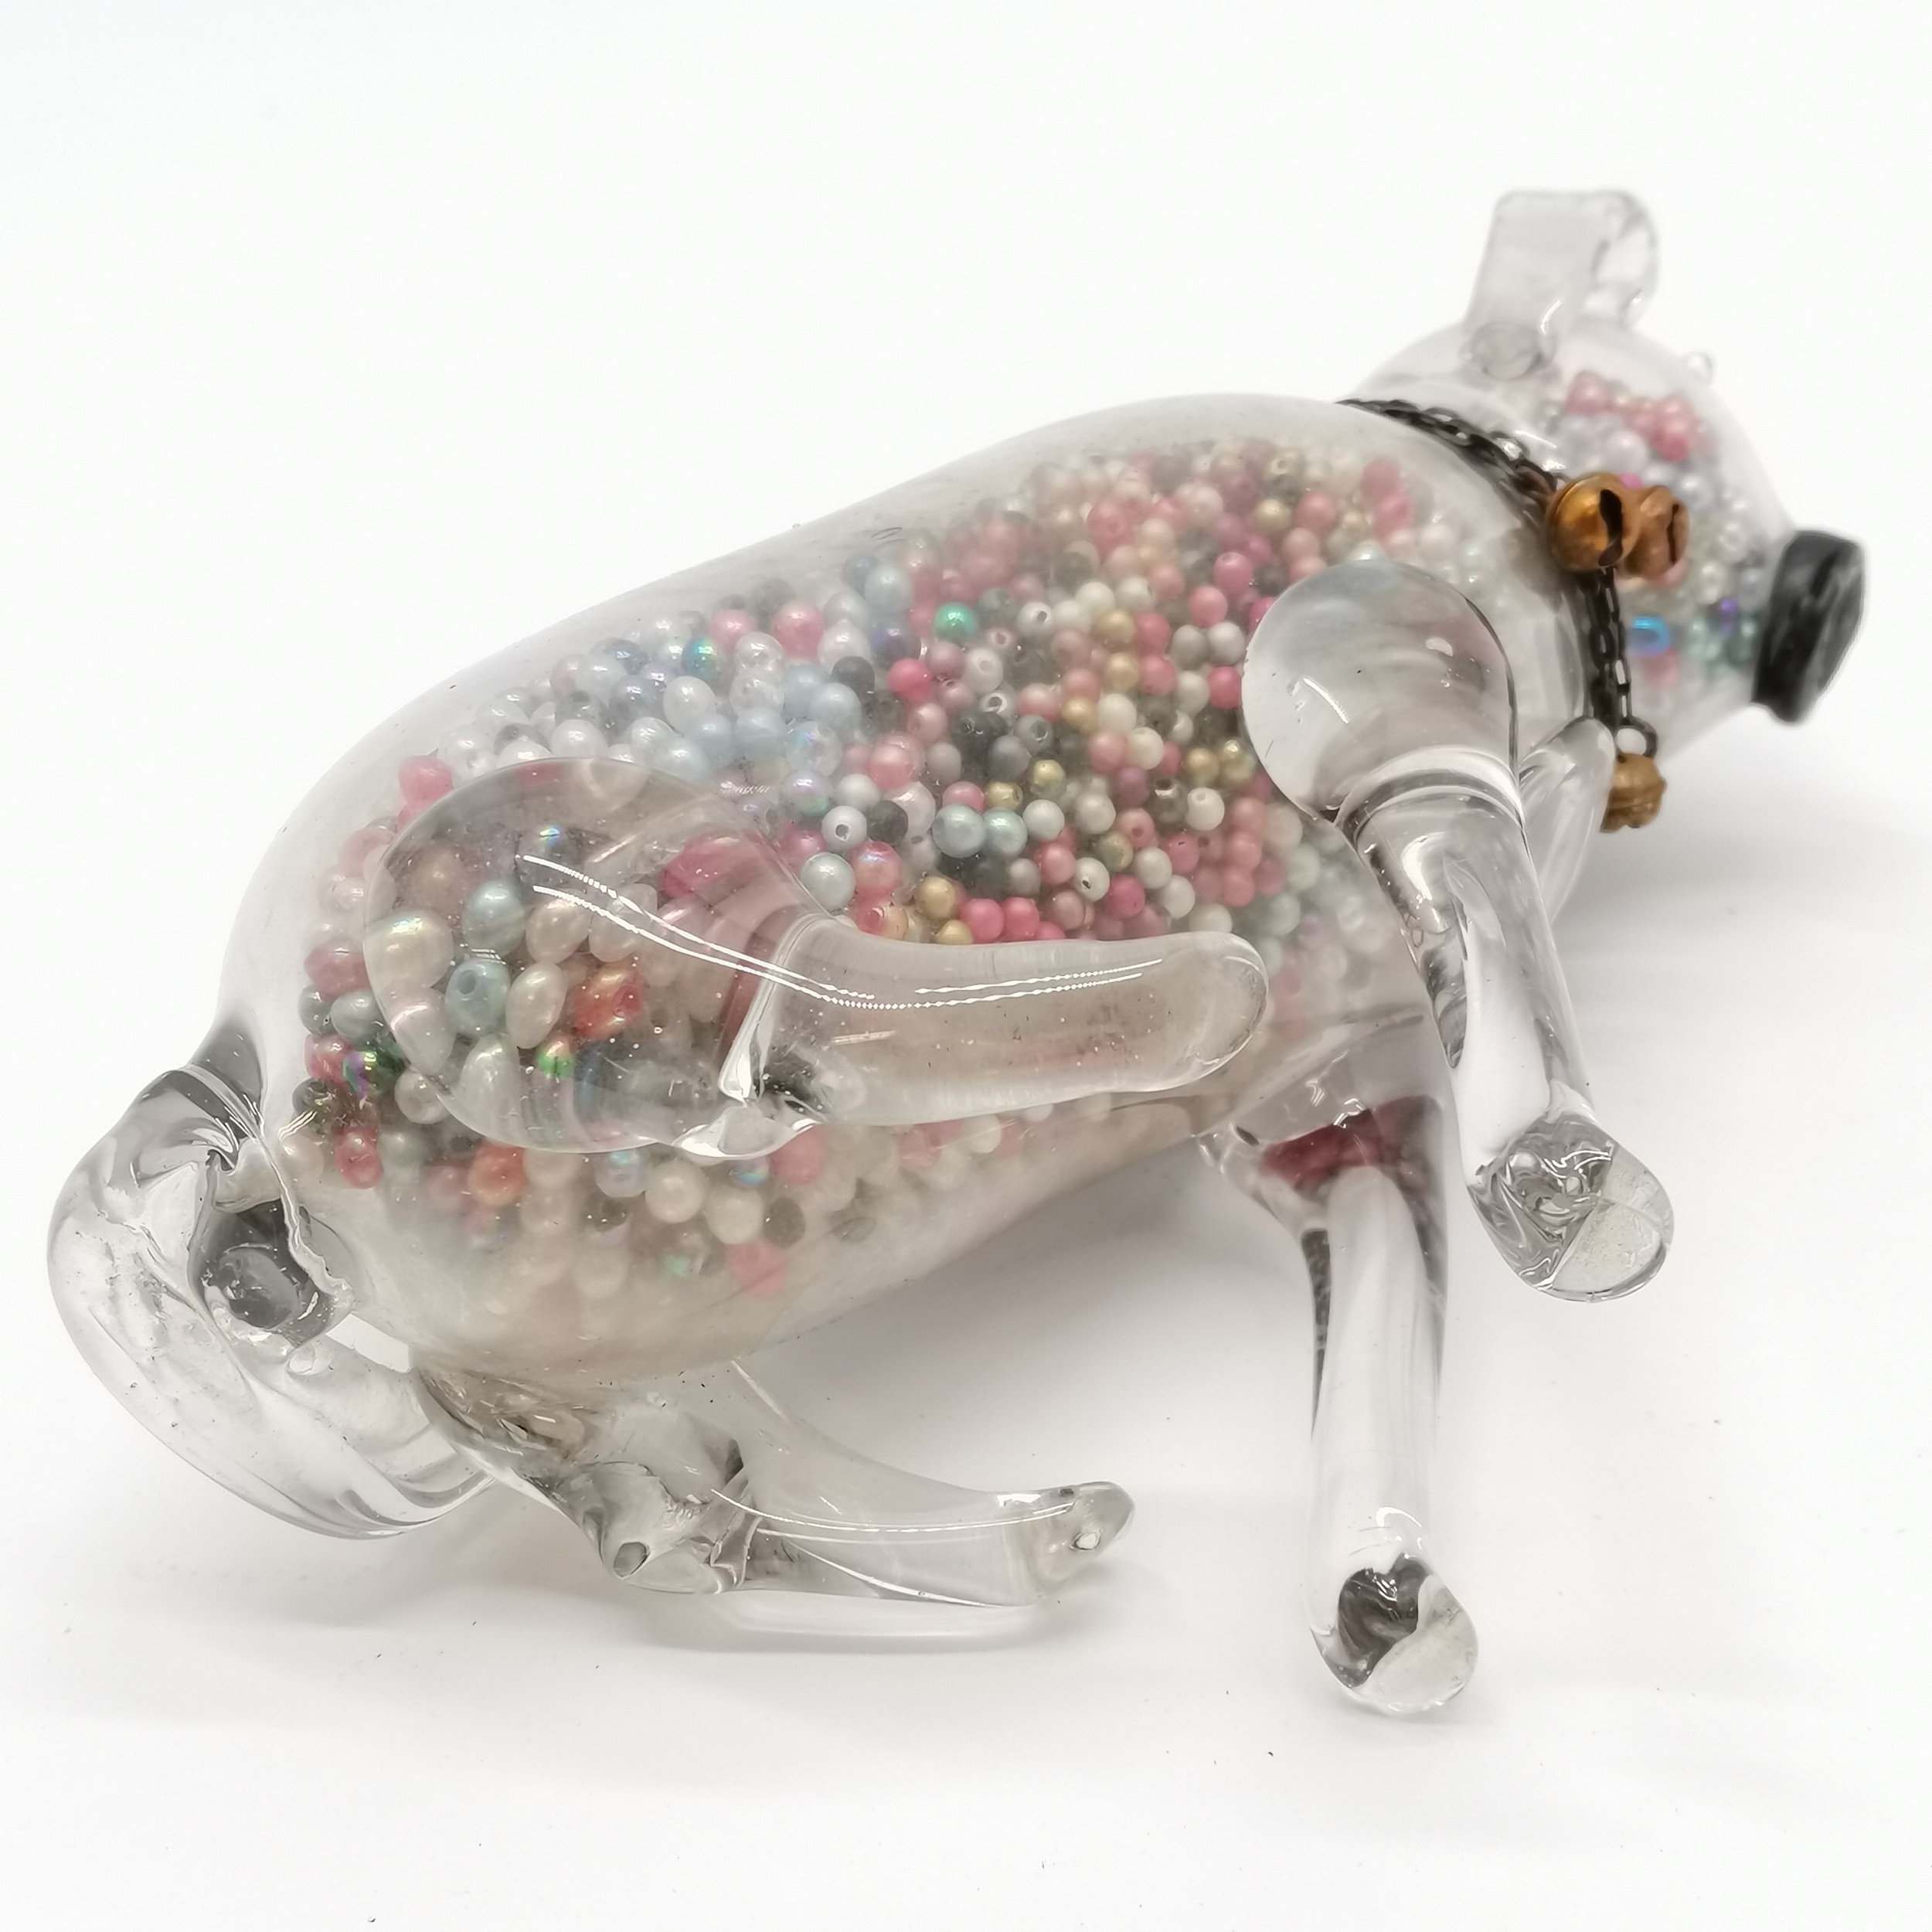 Unusual novelty glass dog figure filled with beads & has a metal chain collar with bells - 18.5cm - Bild 4 aus 4